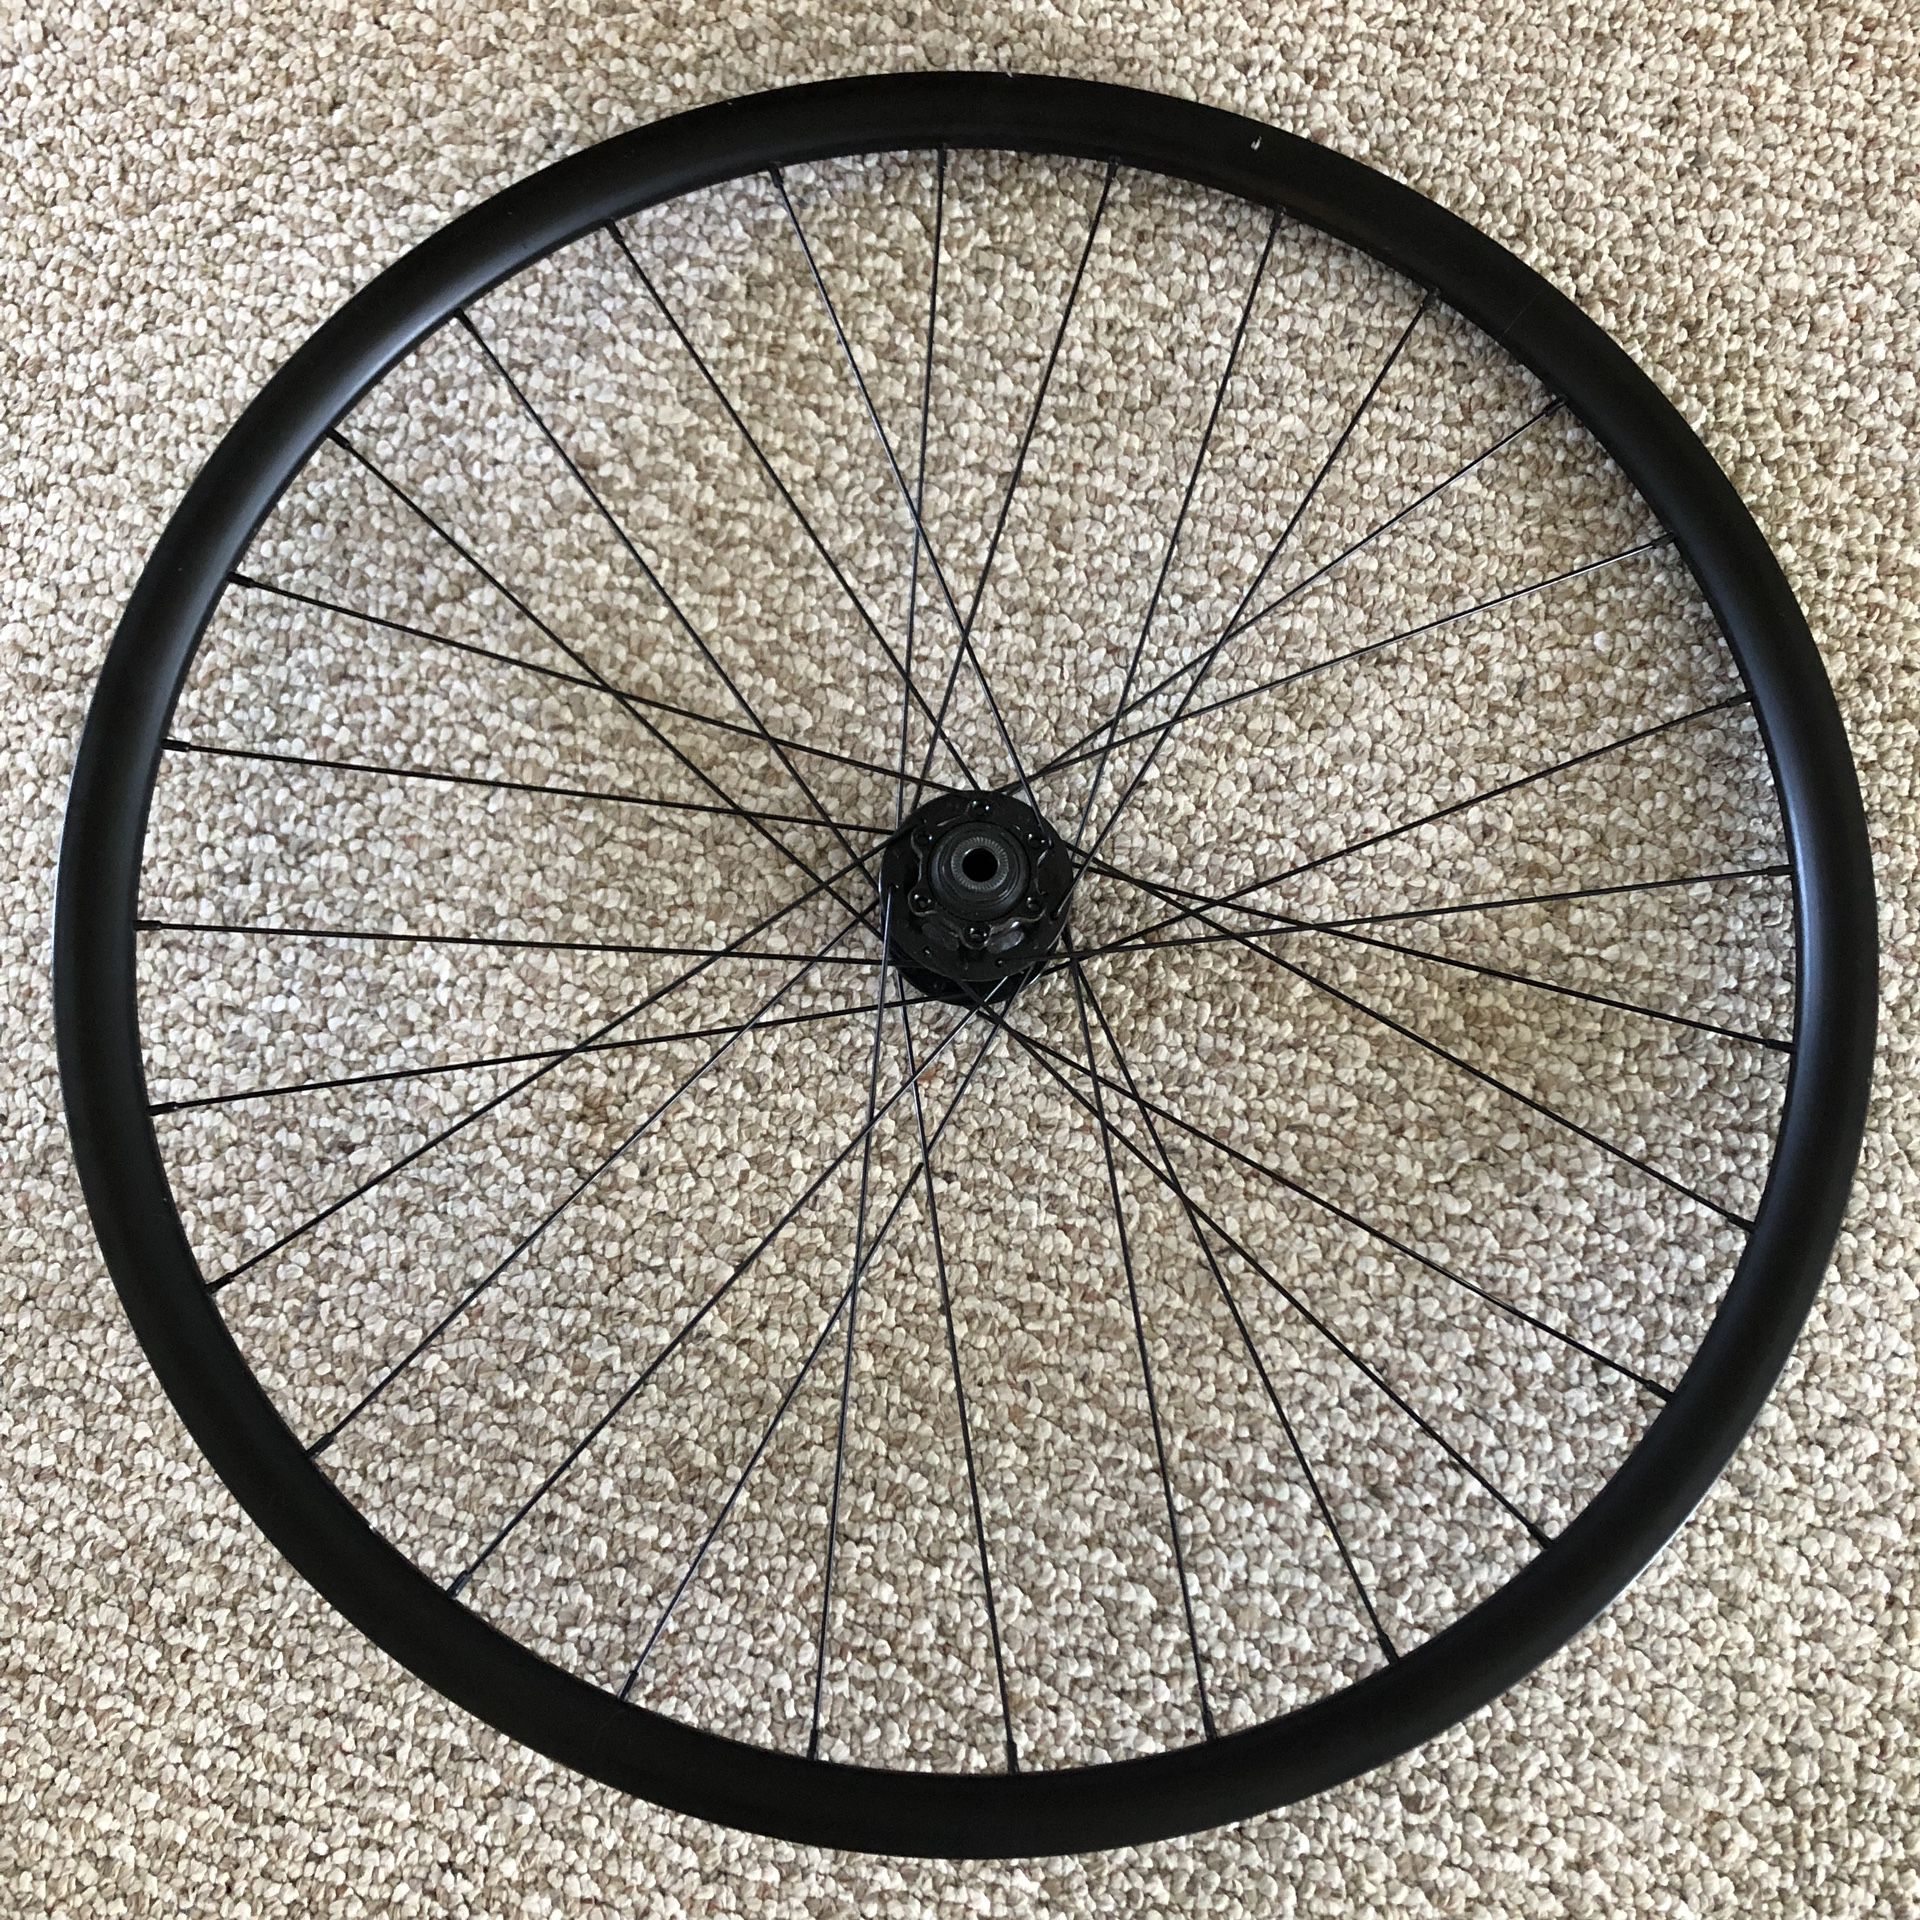 Maddux CX 2.0 Disc Front Wheel 700c Road, Cyclocross, Gravel Bicycle